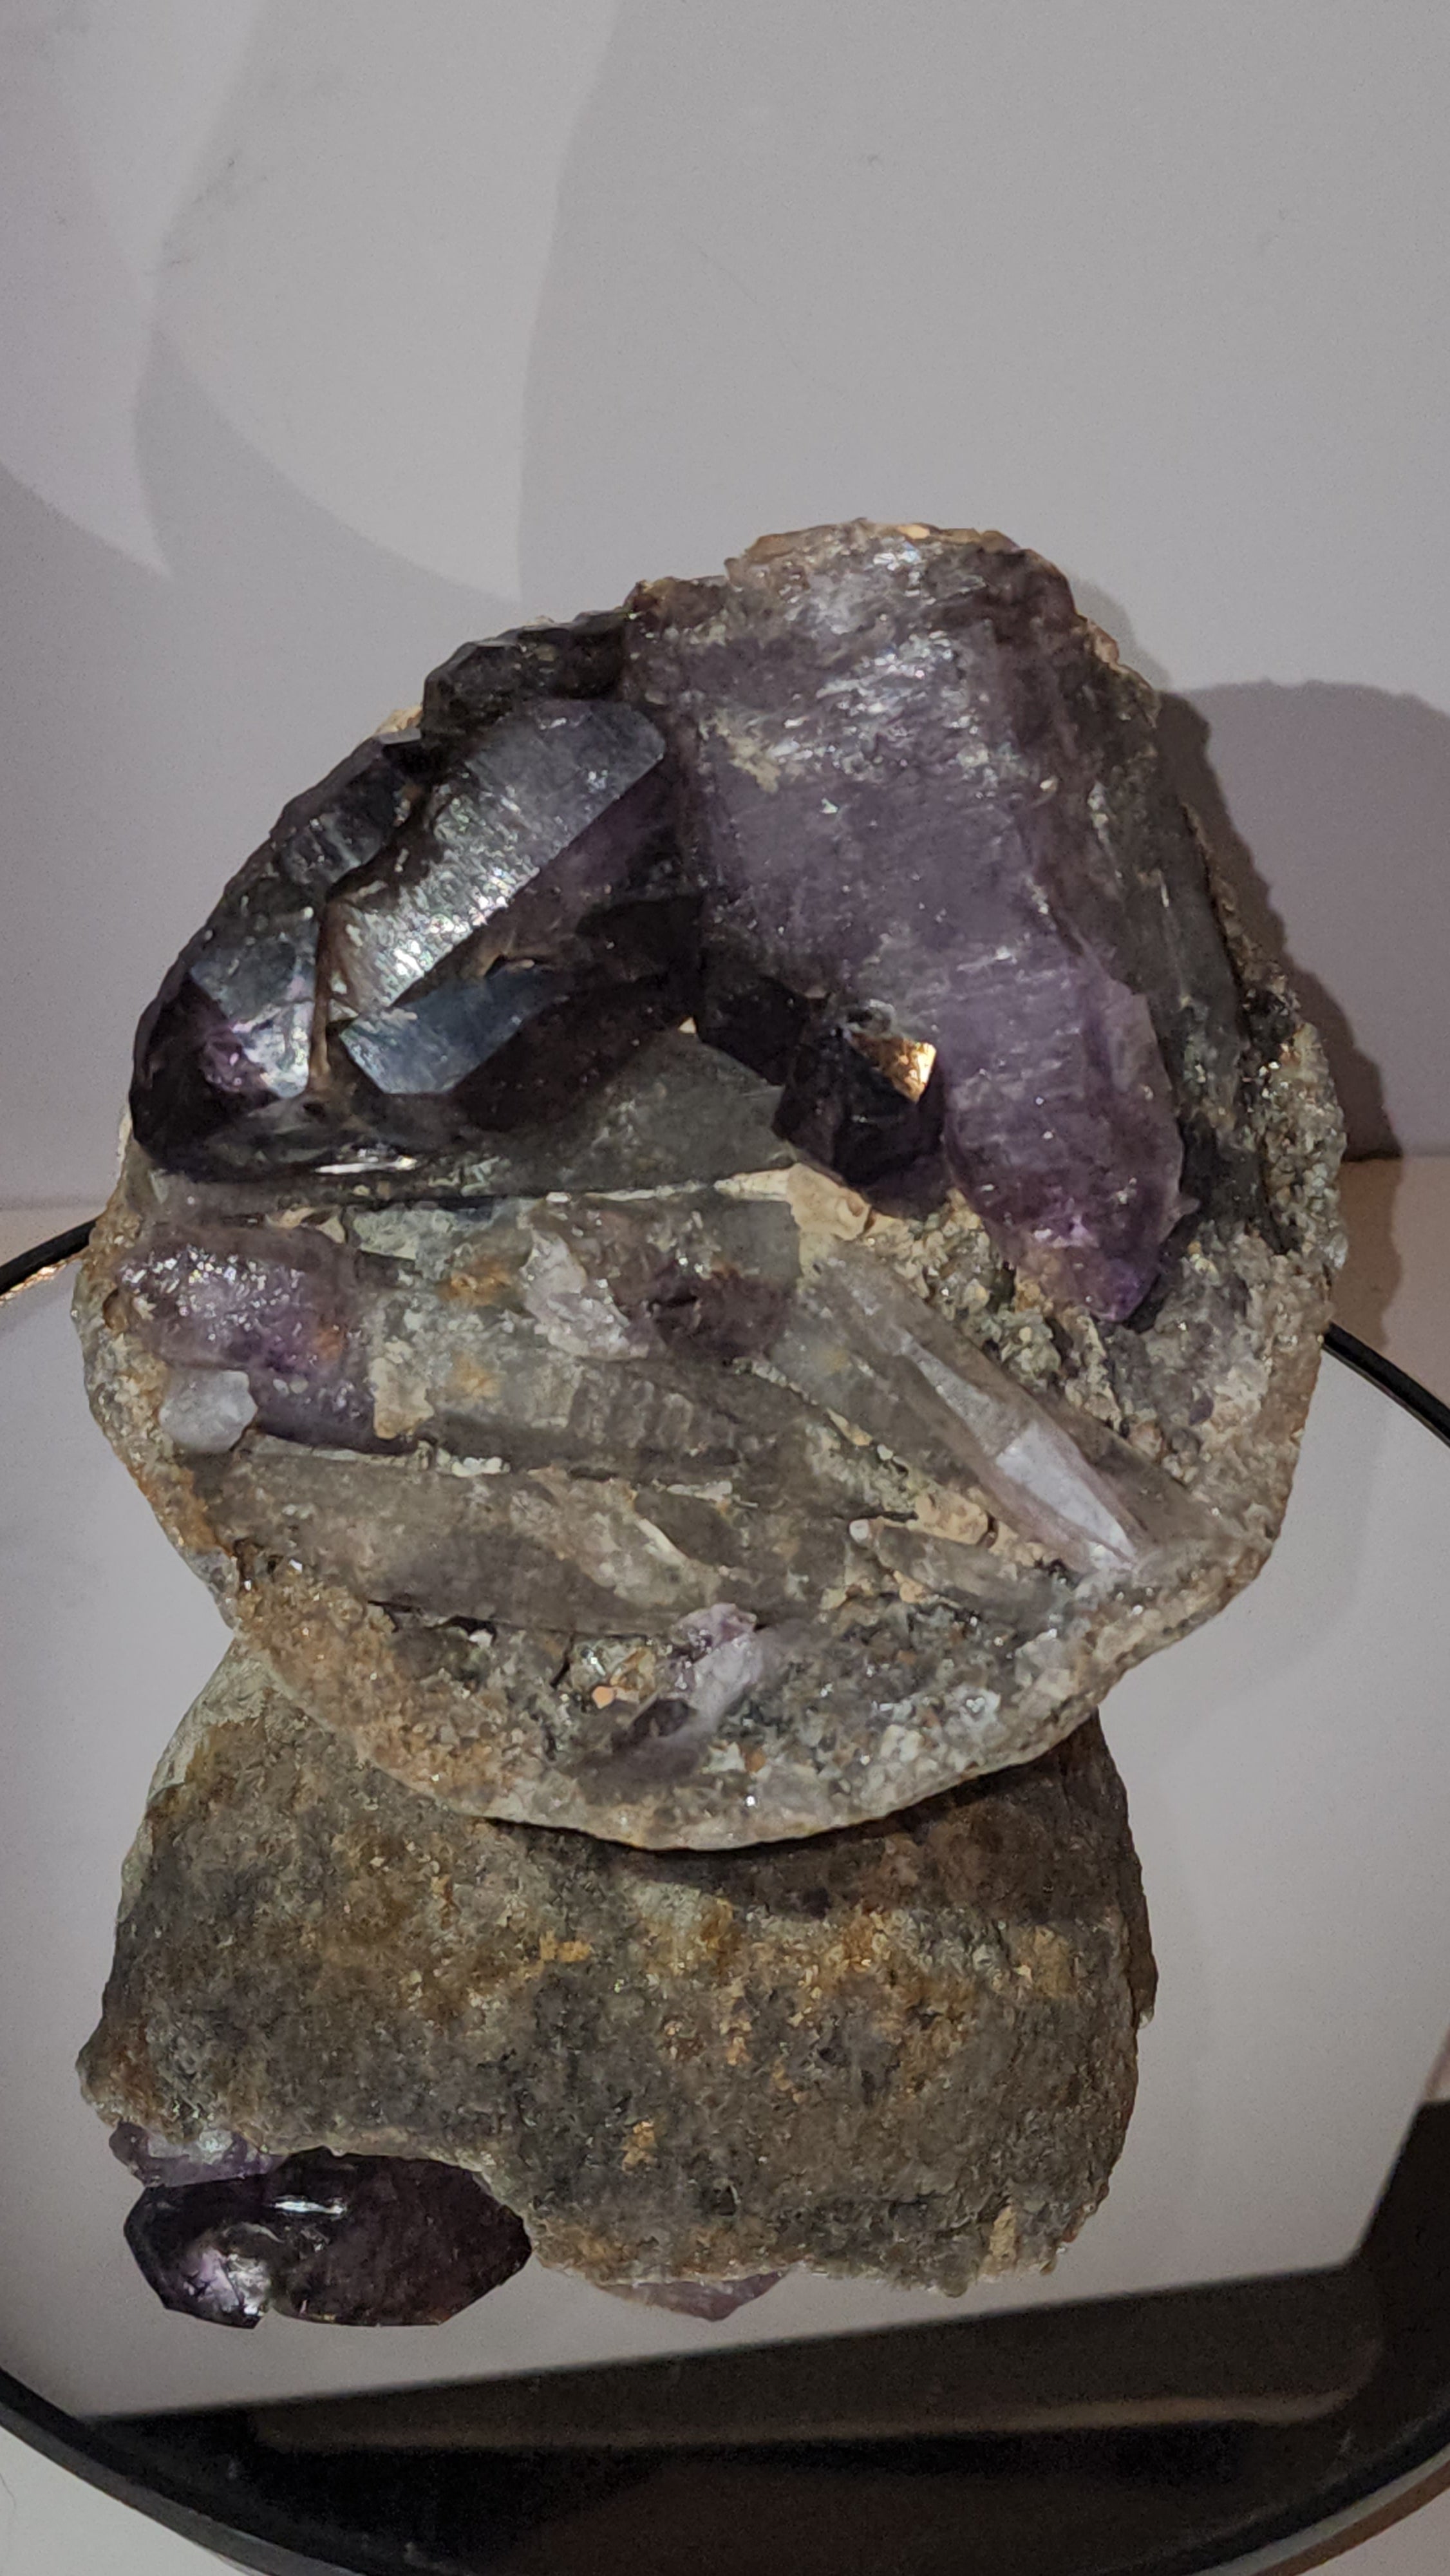 Rare Window Scepter Smoky Amethyst Still Intact Of Nodule / Geode  Form Specime With Enydhro